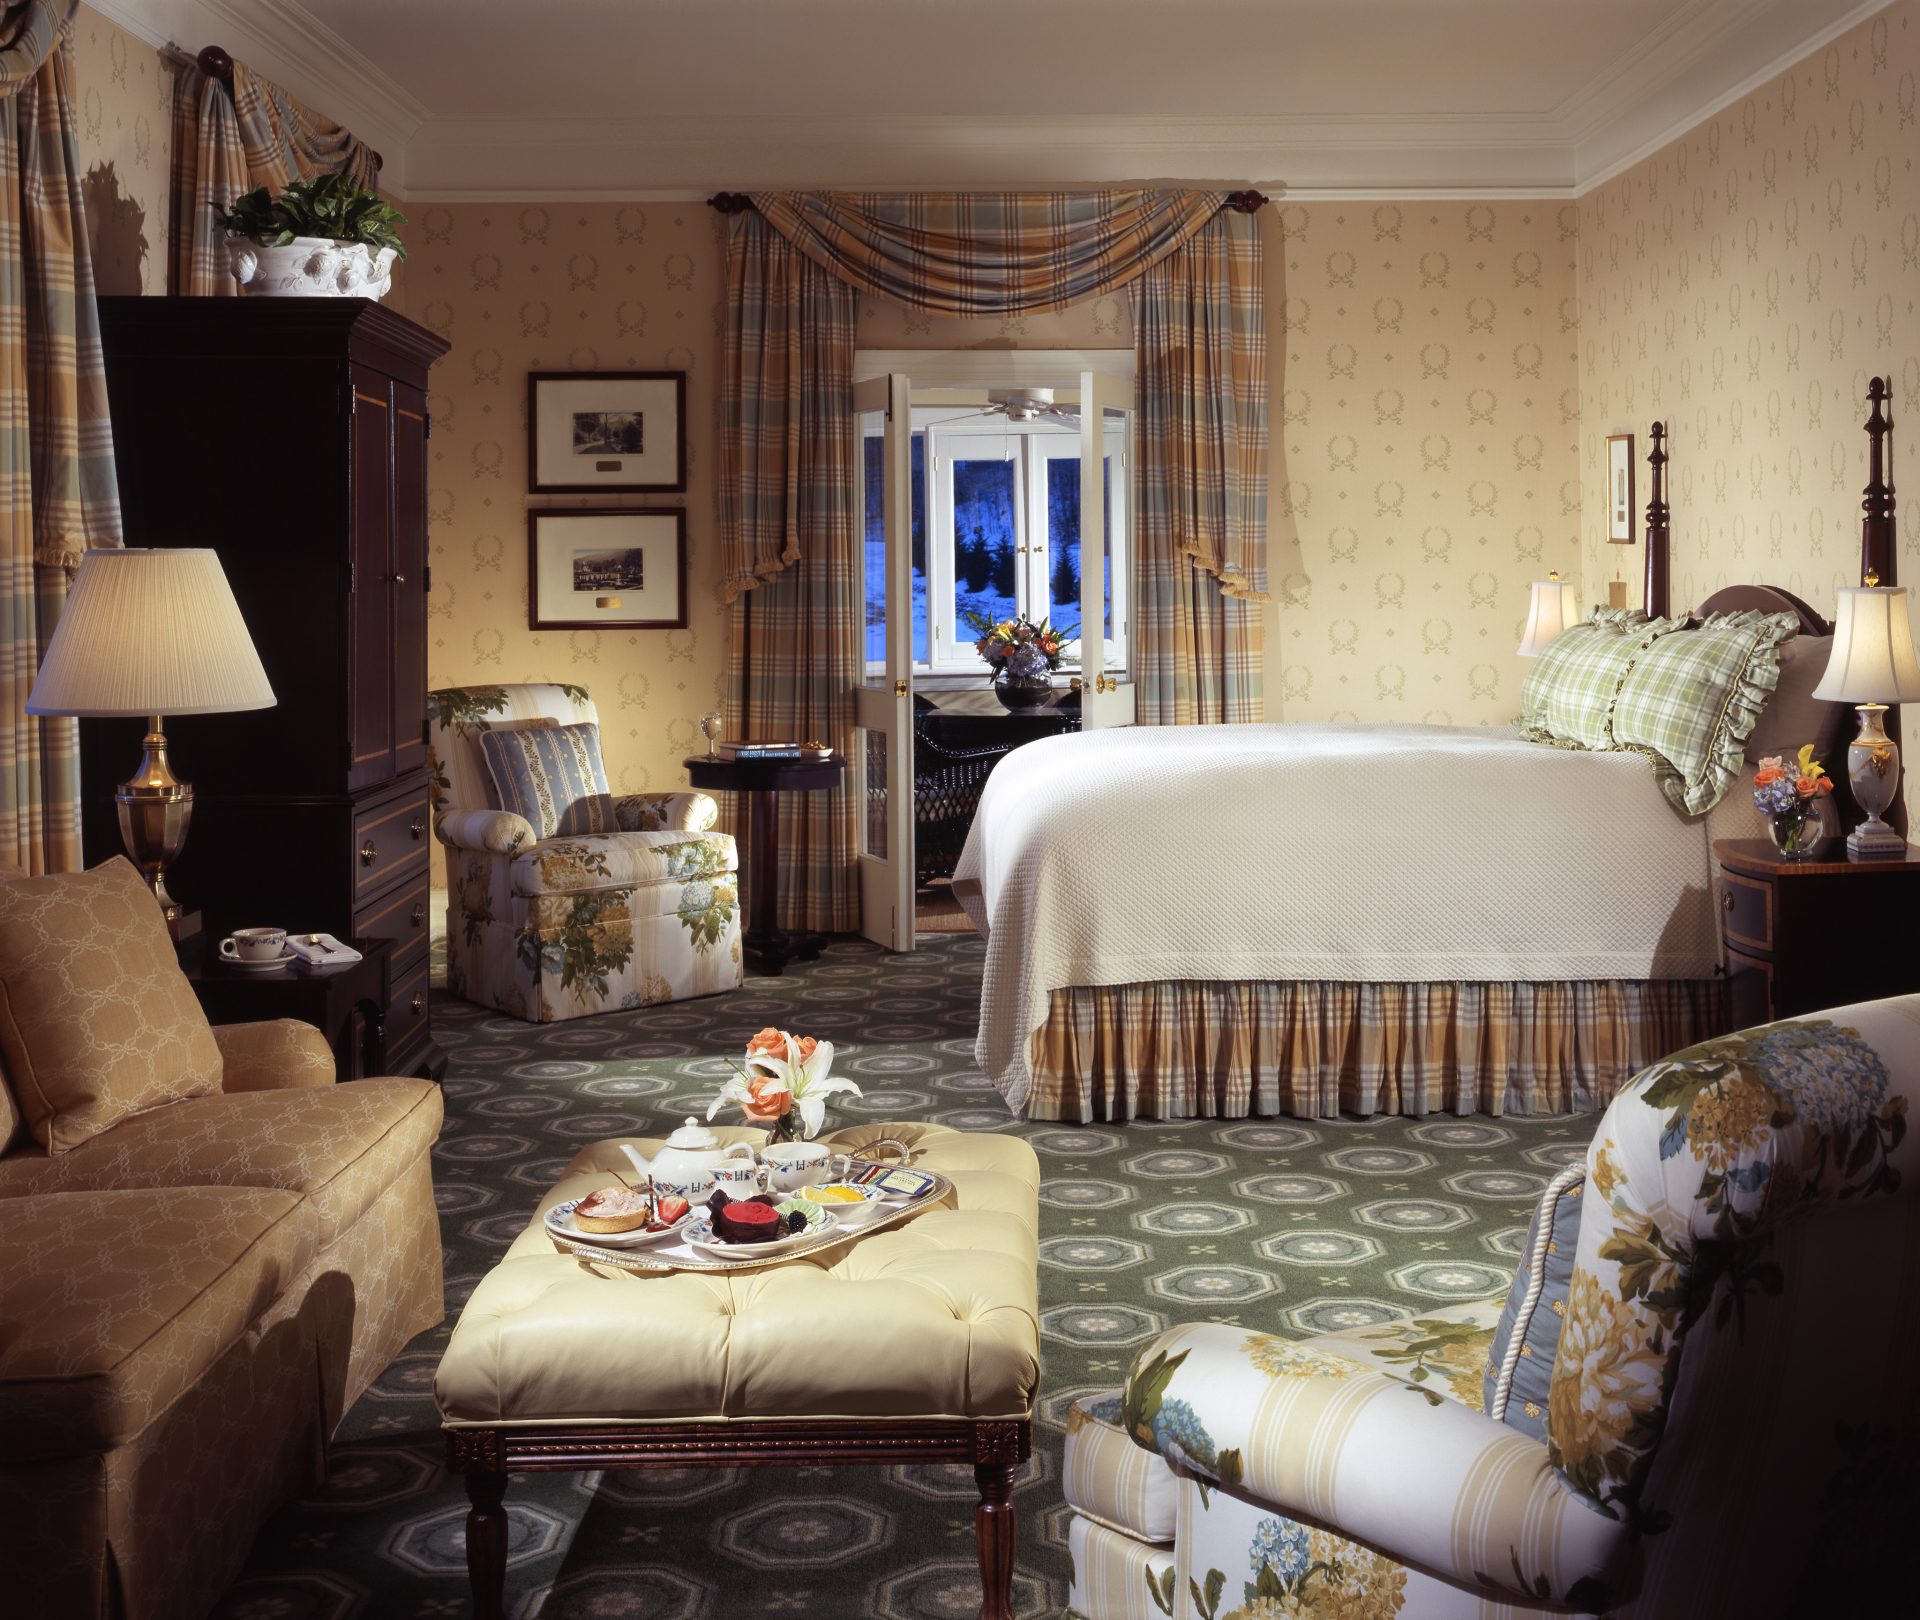 Top 10 Luxury Hotels With Classic Furniture In Usa ⋆ Luxury Italian